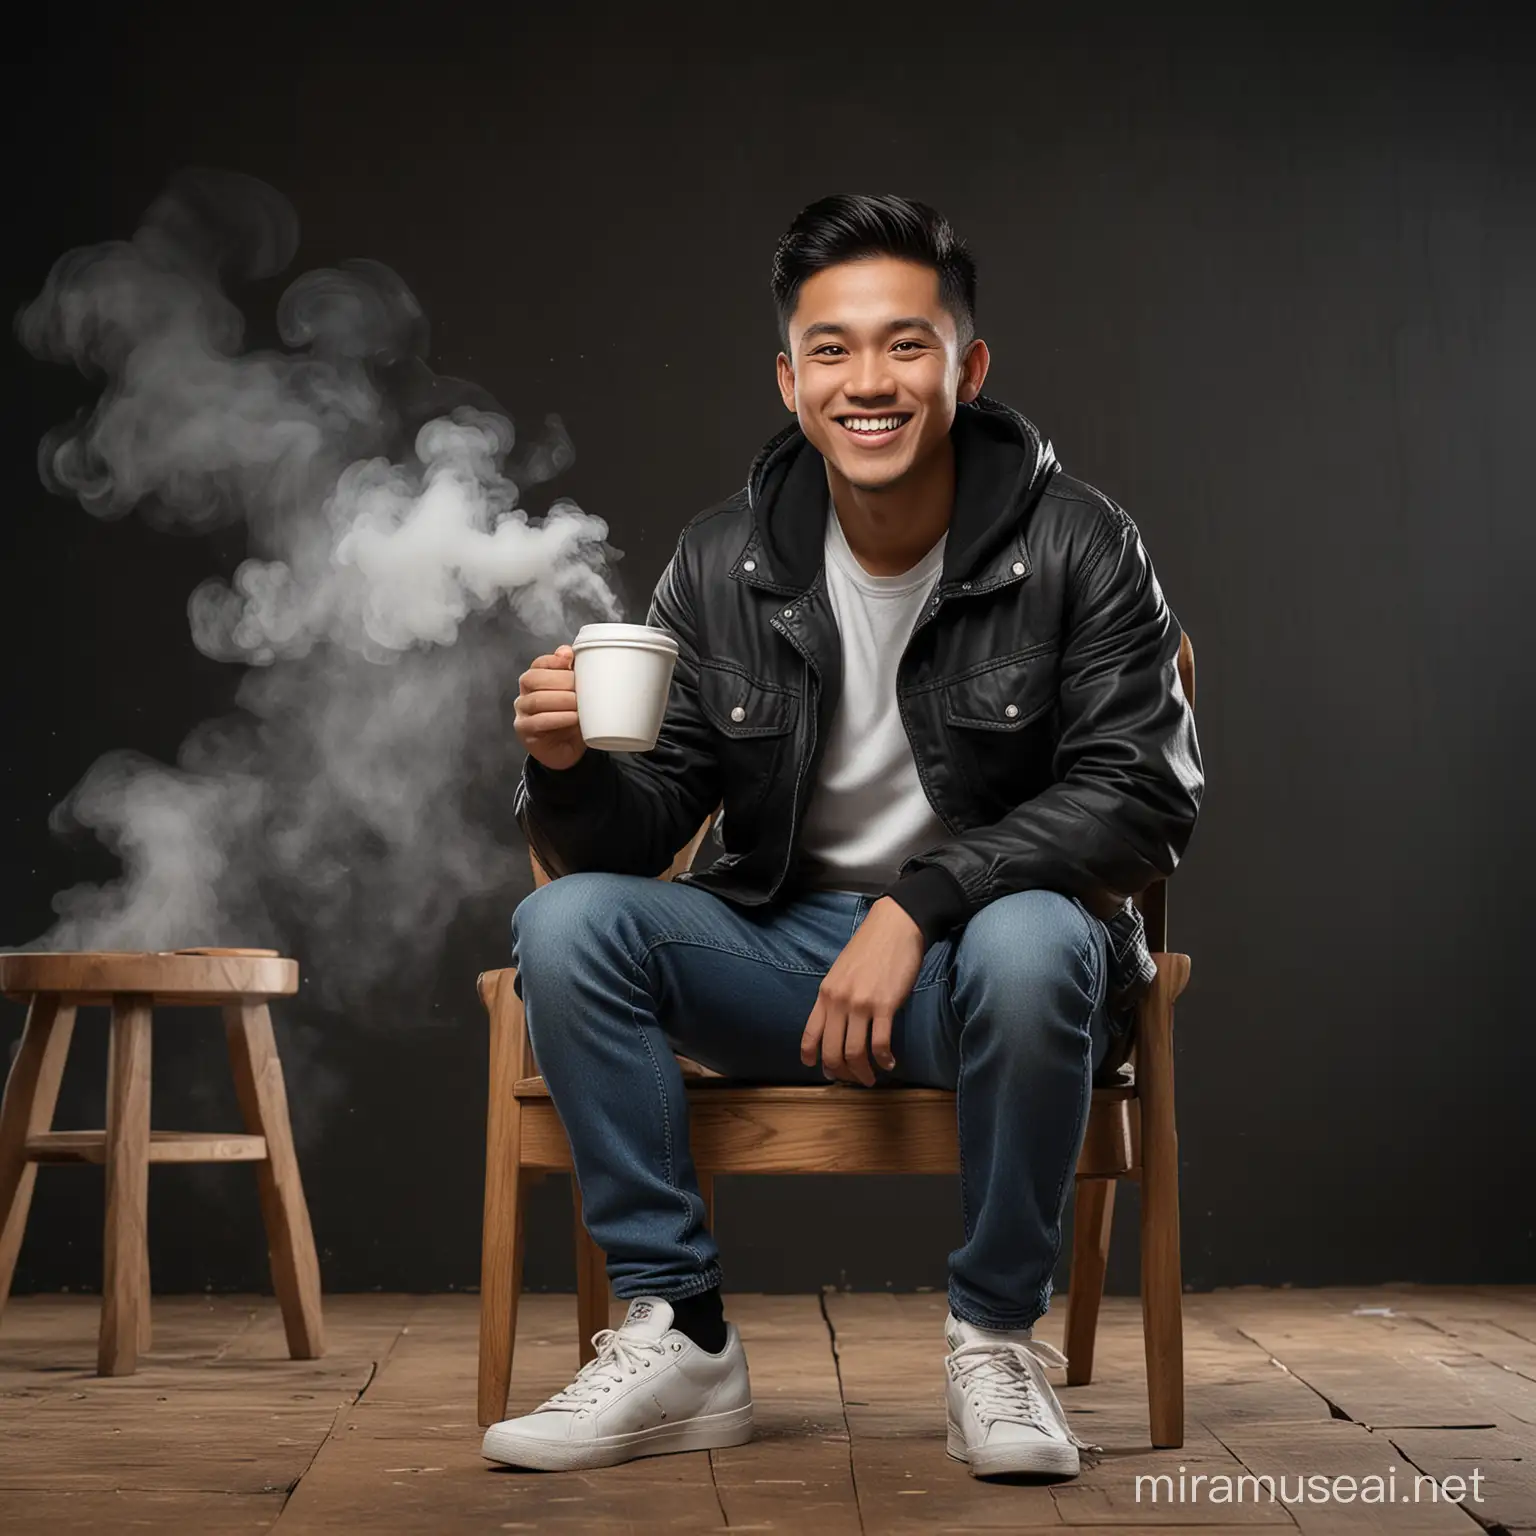 Indonesian Man Enjoying Coffee on Wooden Chair with Smoke Effect